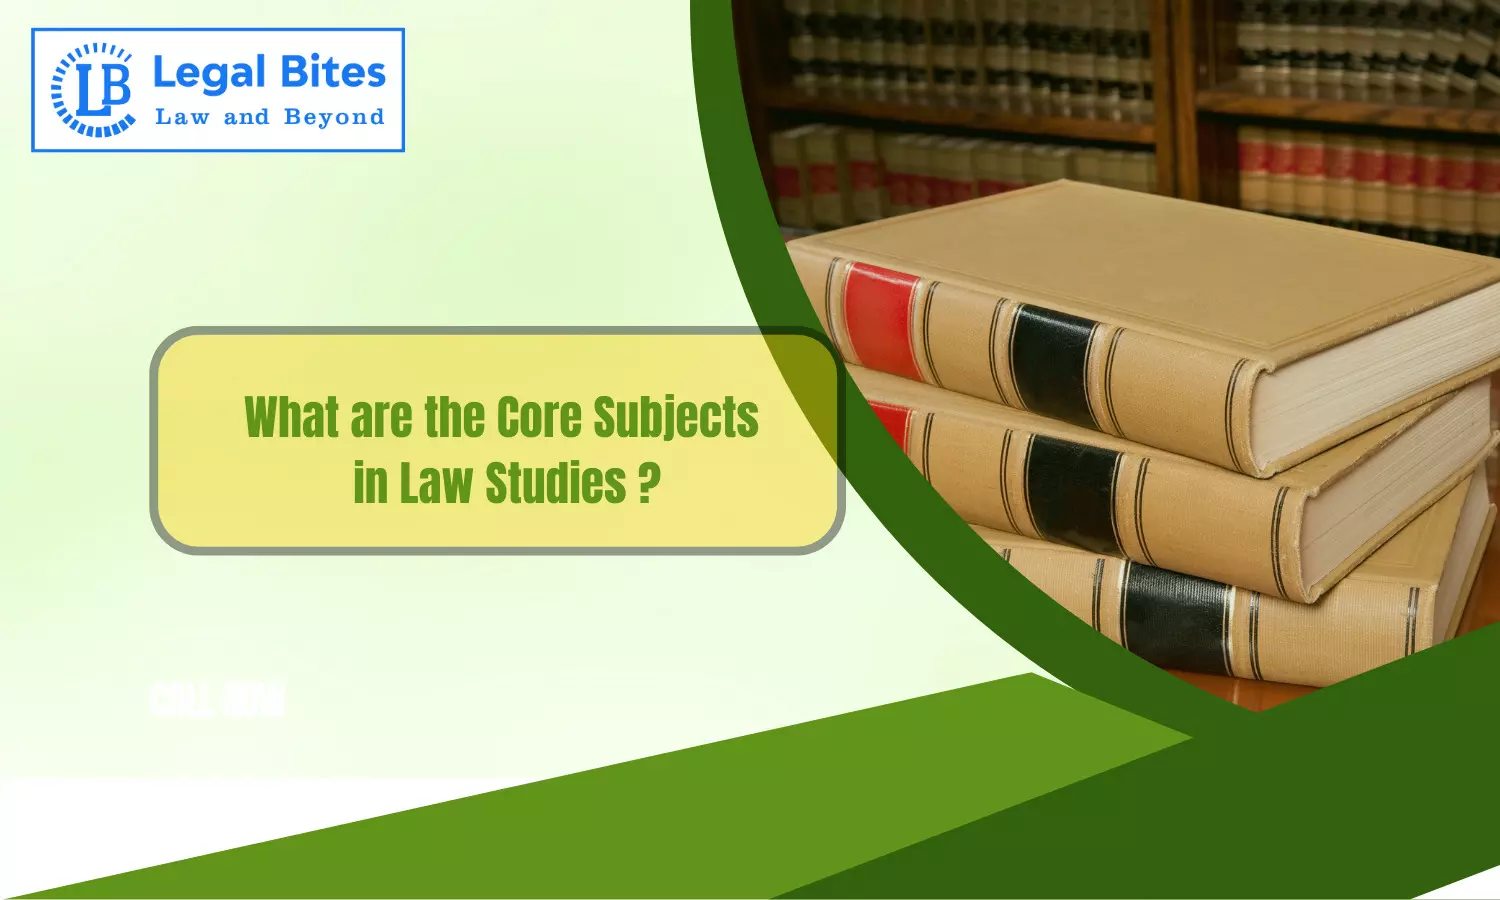 What are the core subjects in law studies?